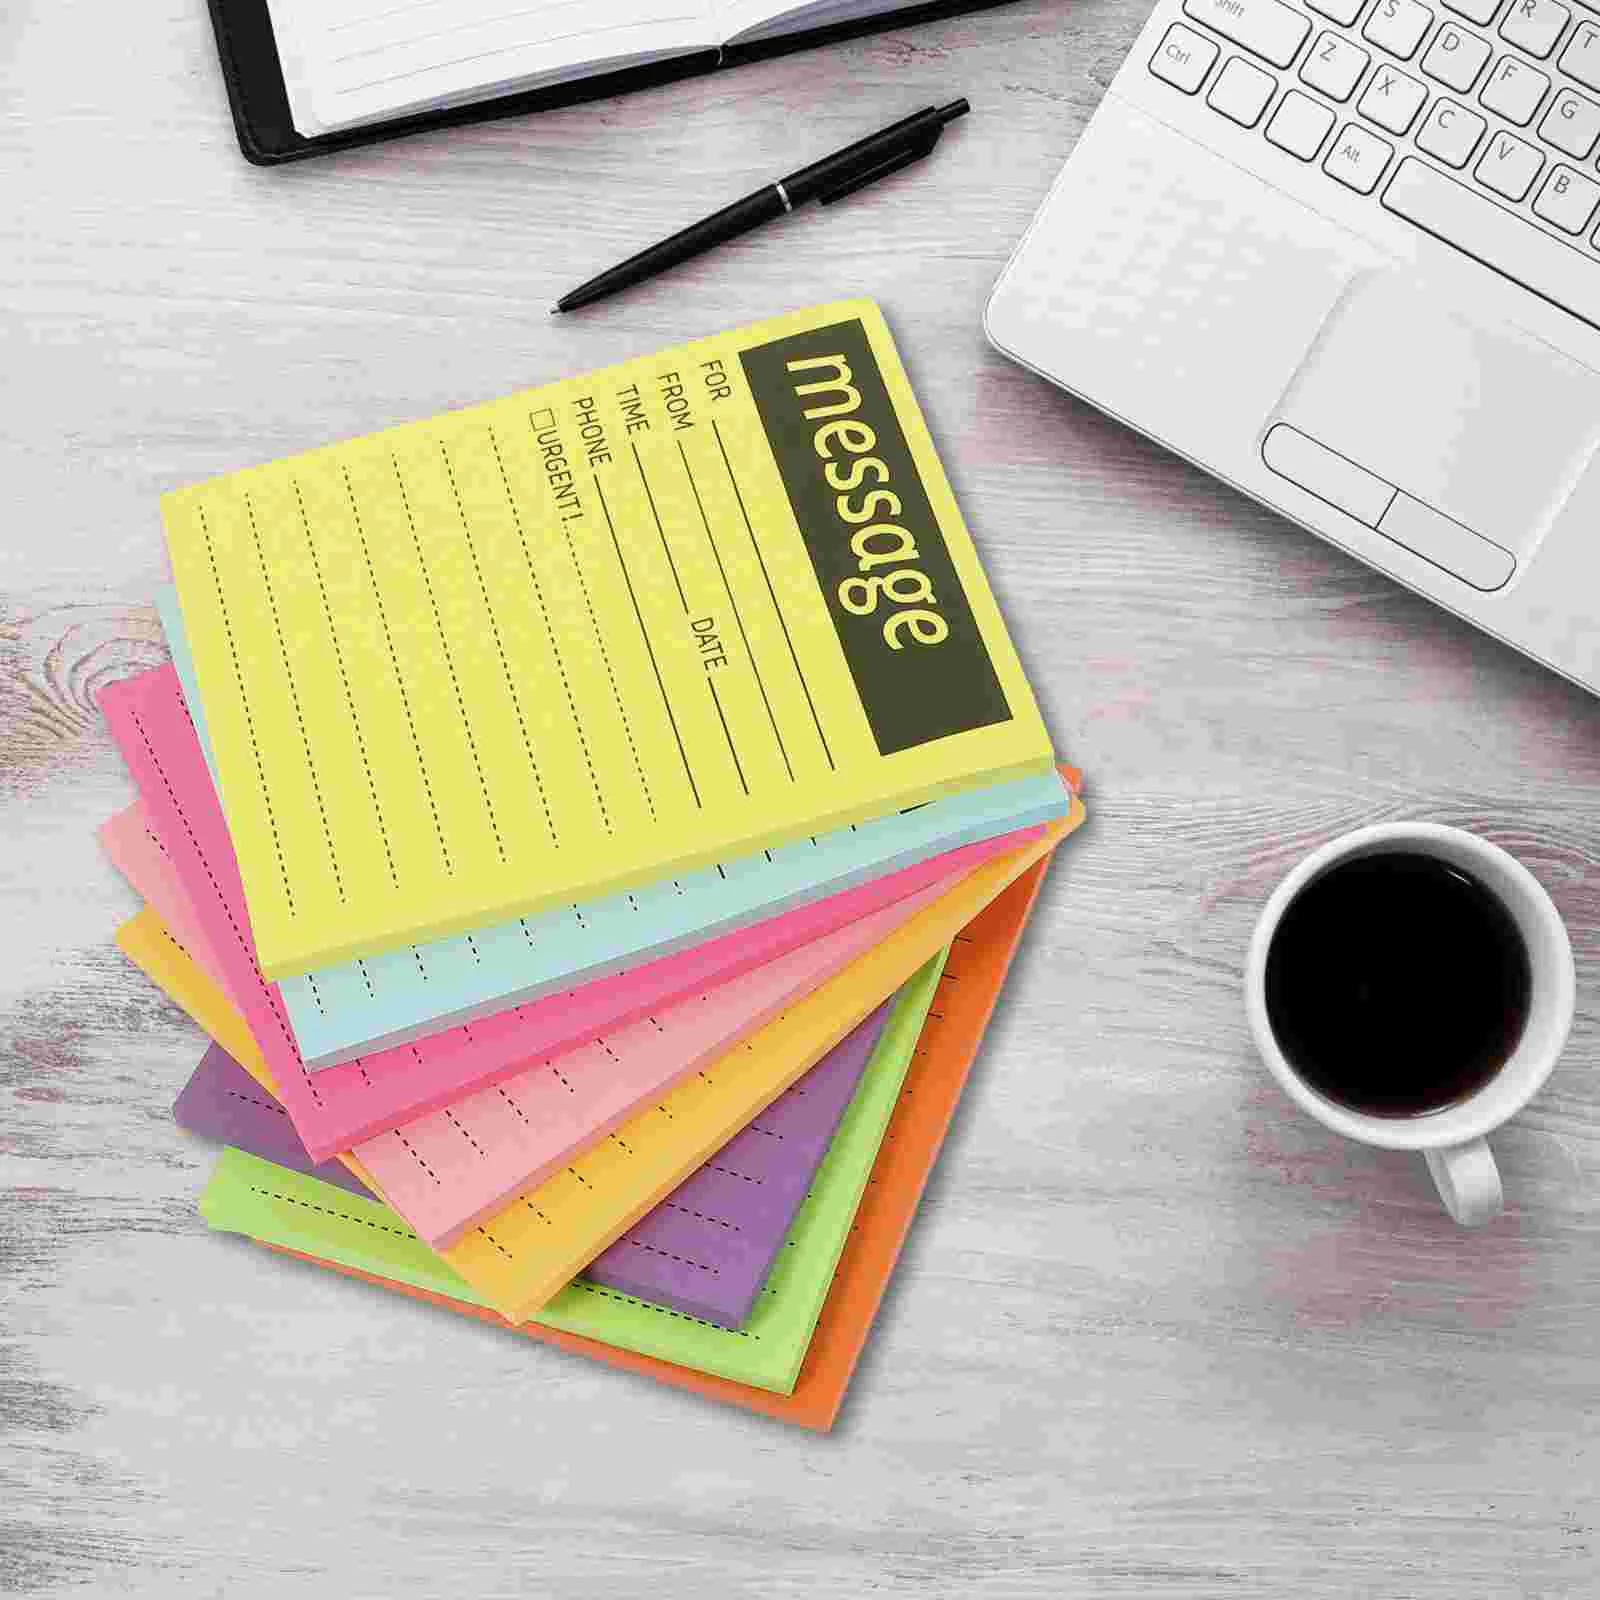 

9 Books Fluorescent Sticky Notes Portable Message Pads Stickers Compact Guestbook School Memo Multi-function Desktop Accessory